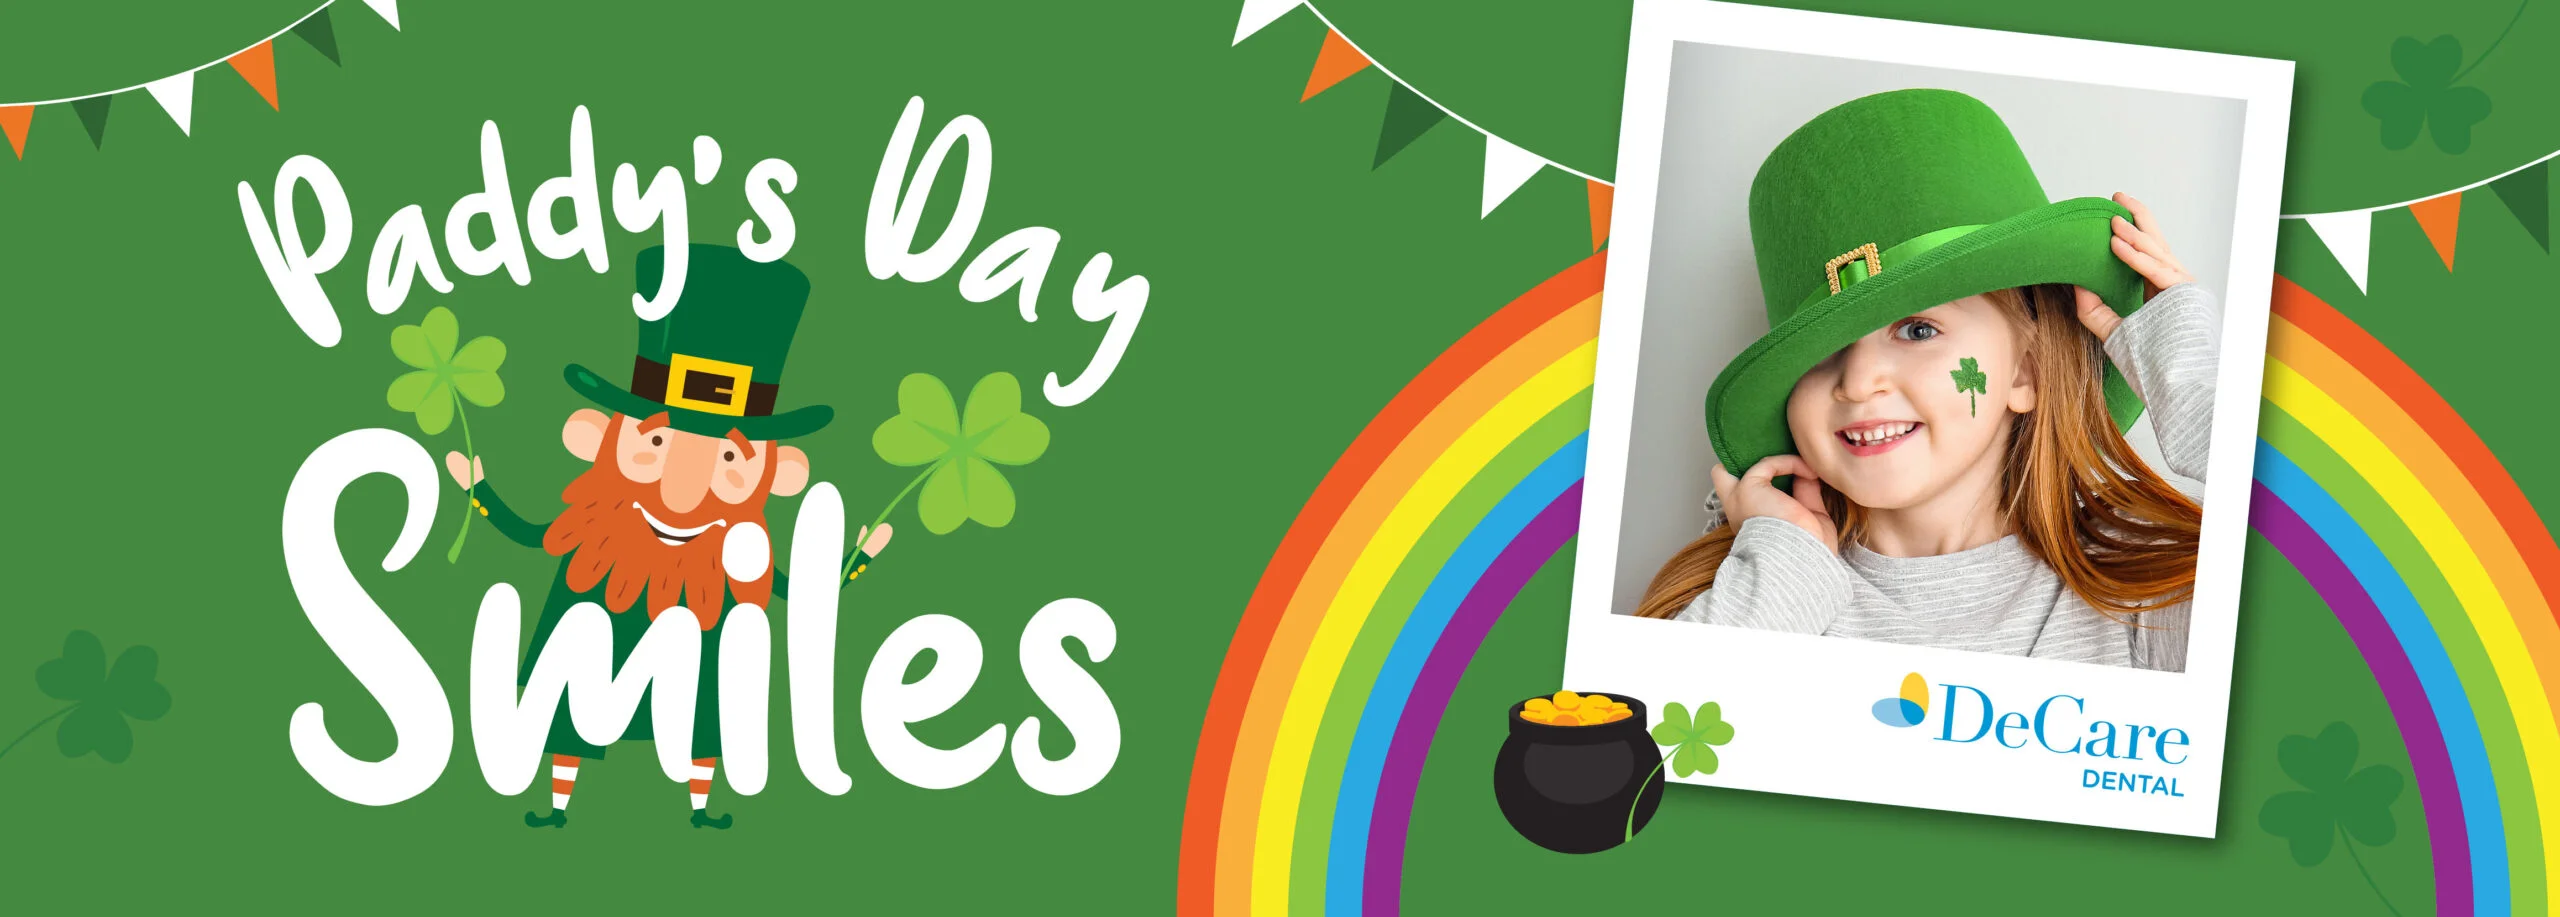 paddys day smiles banner